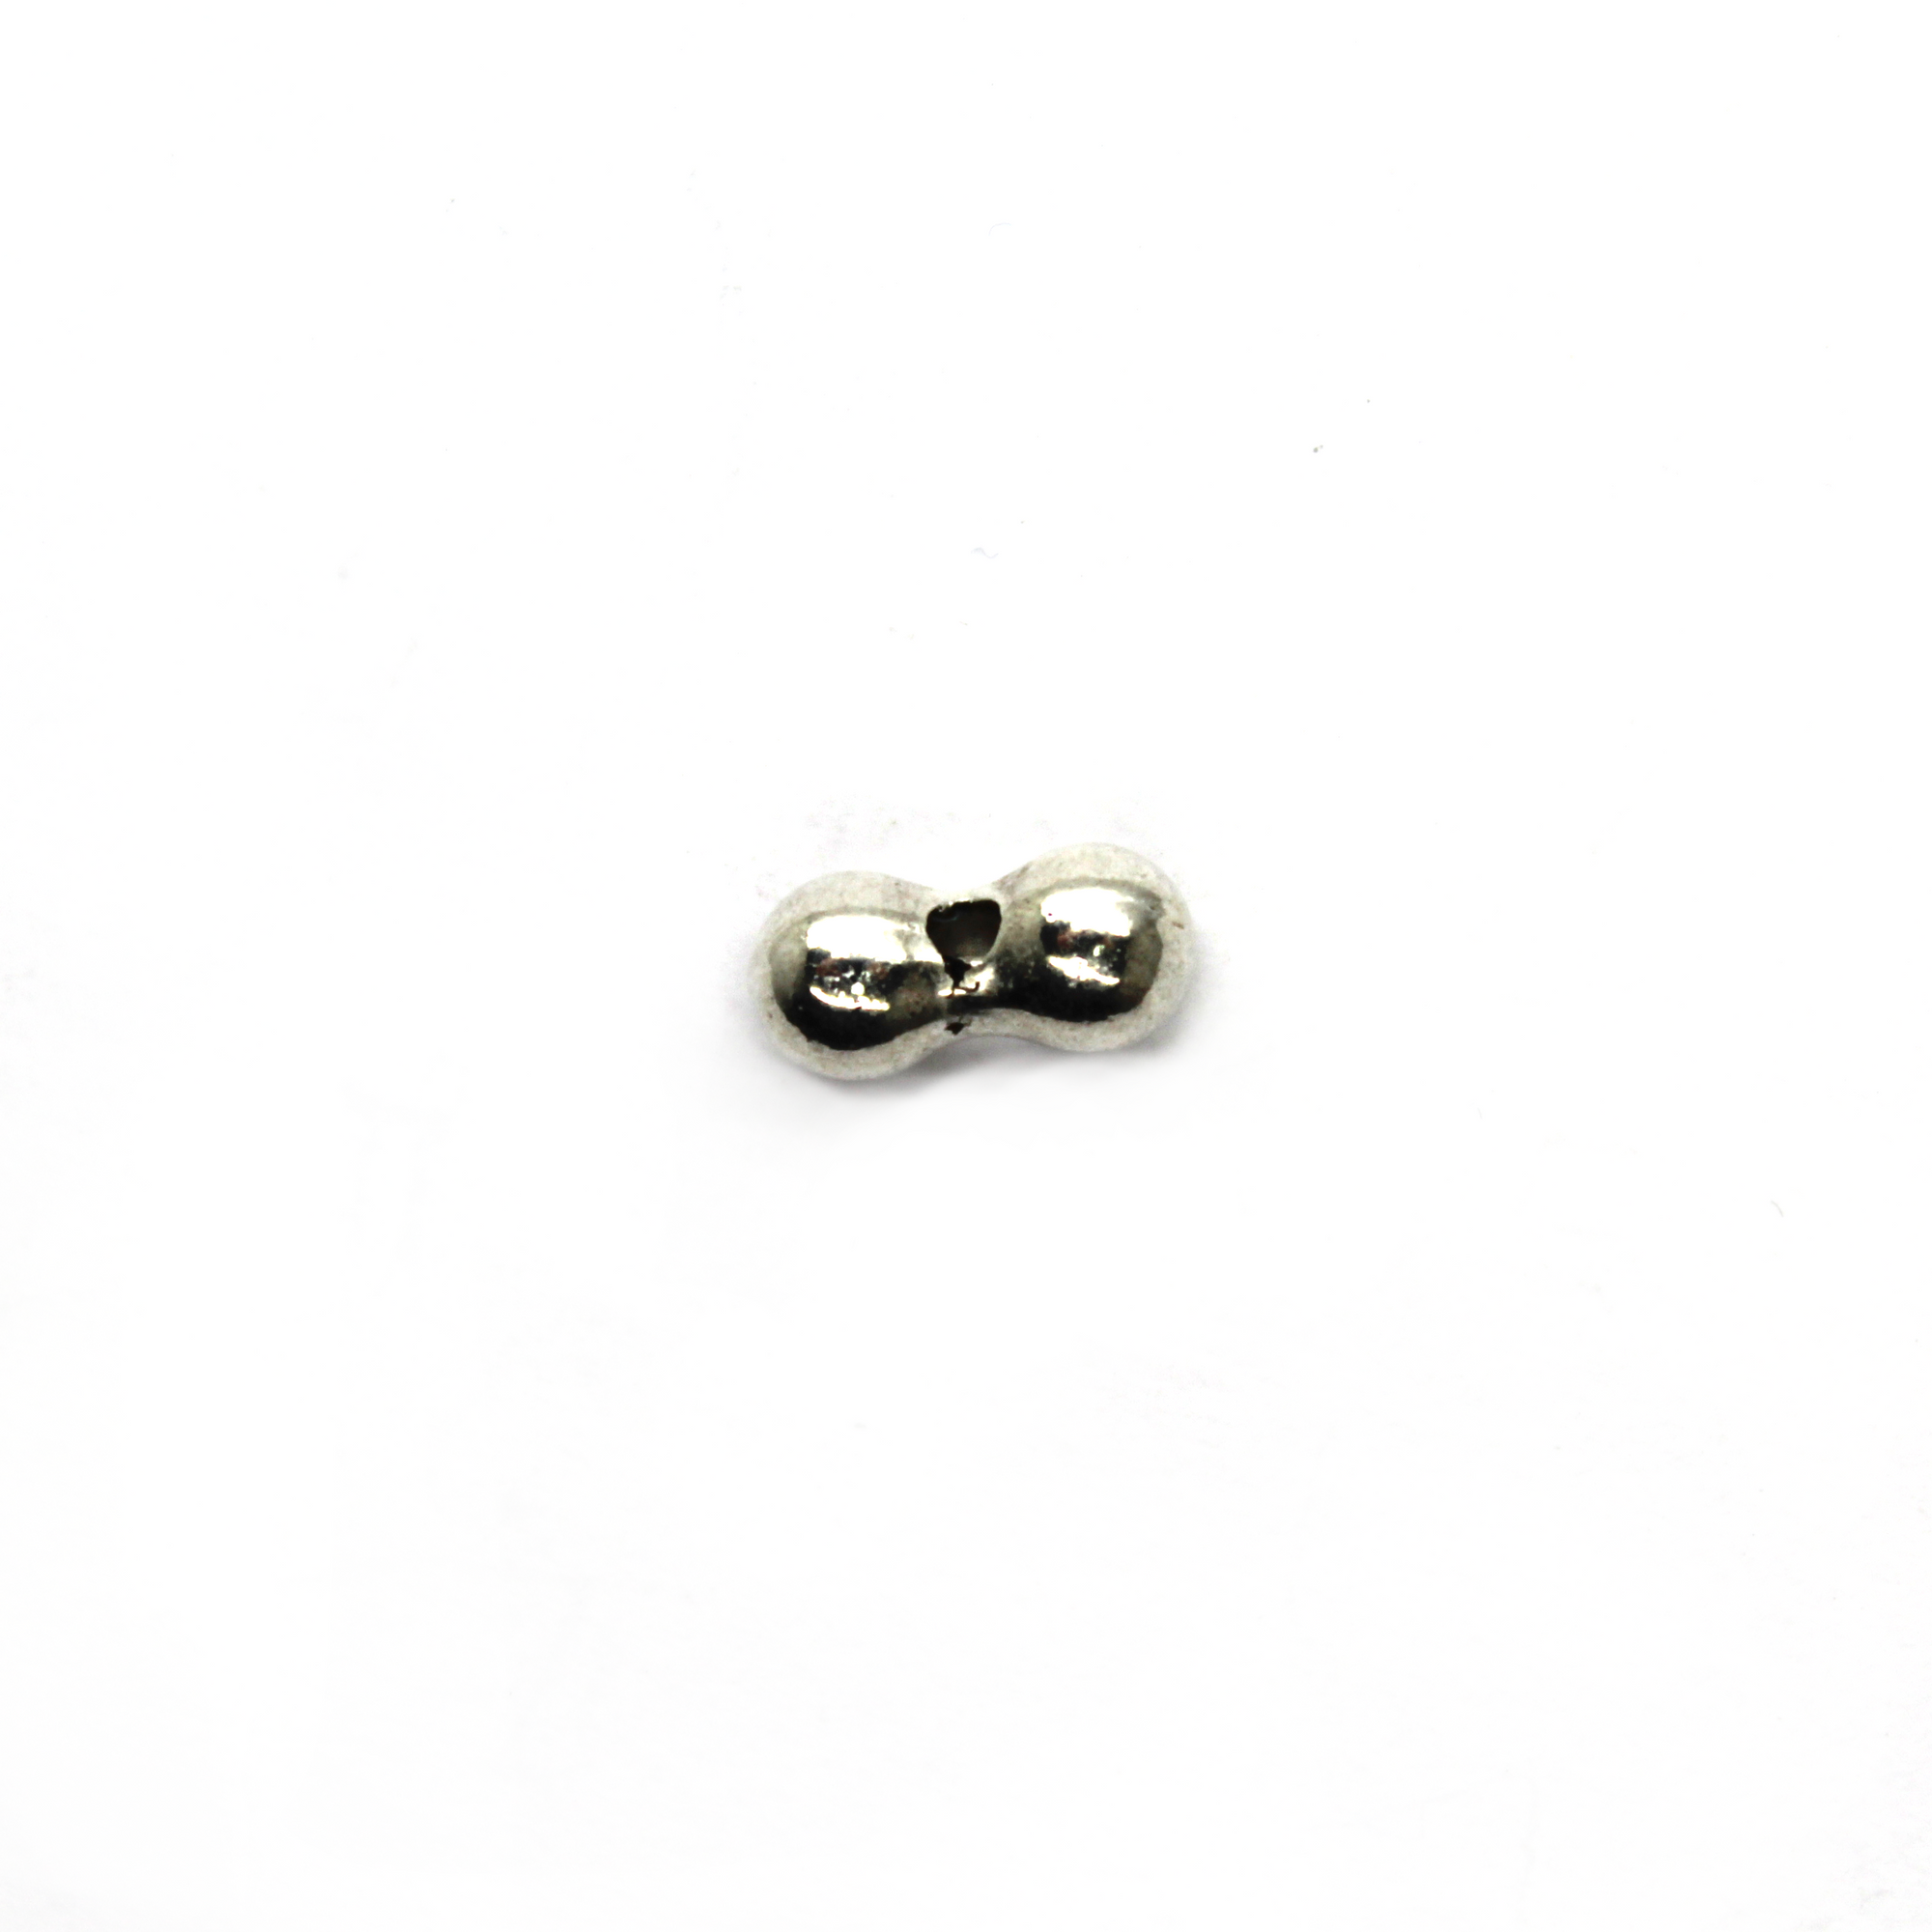 Spacer, Curvy, Silver, Alloy, Round, 9mm x 4mm, Sold Per pkg of 19